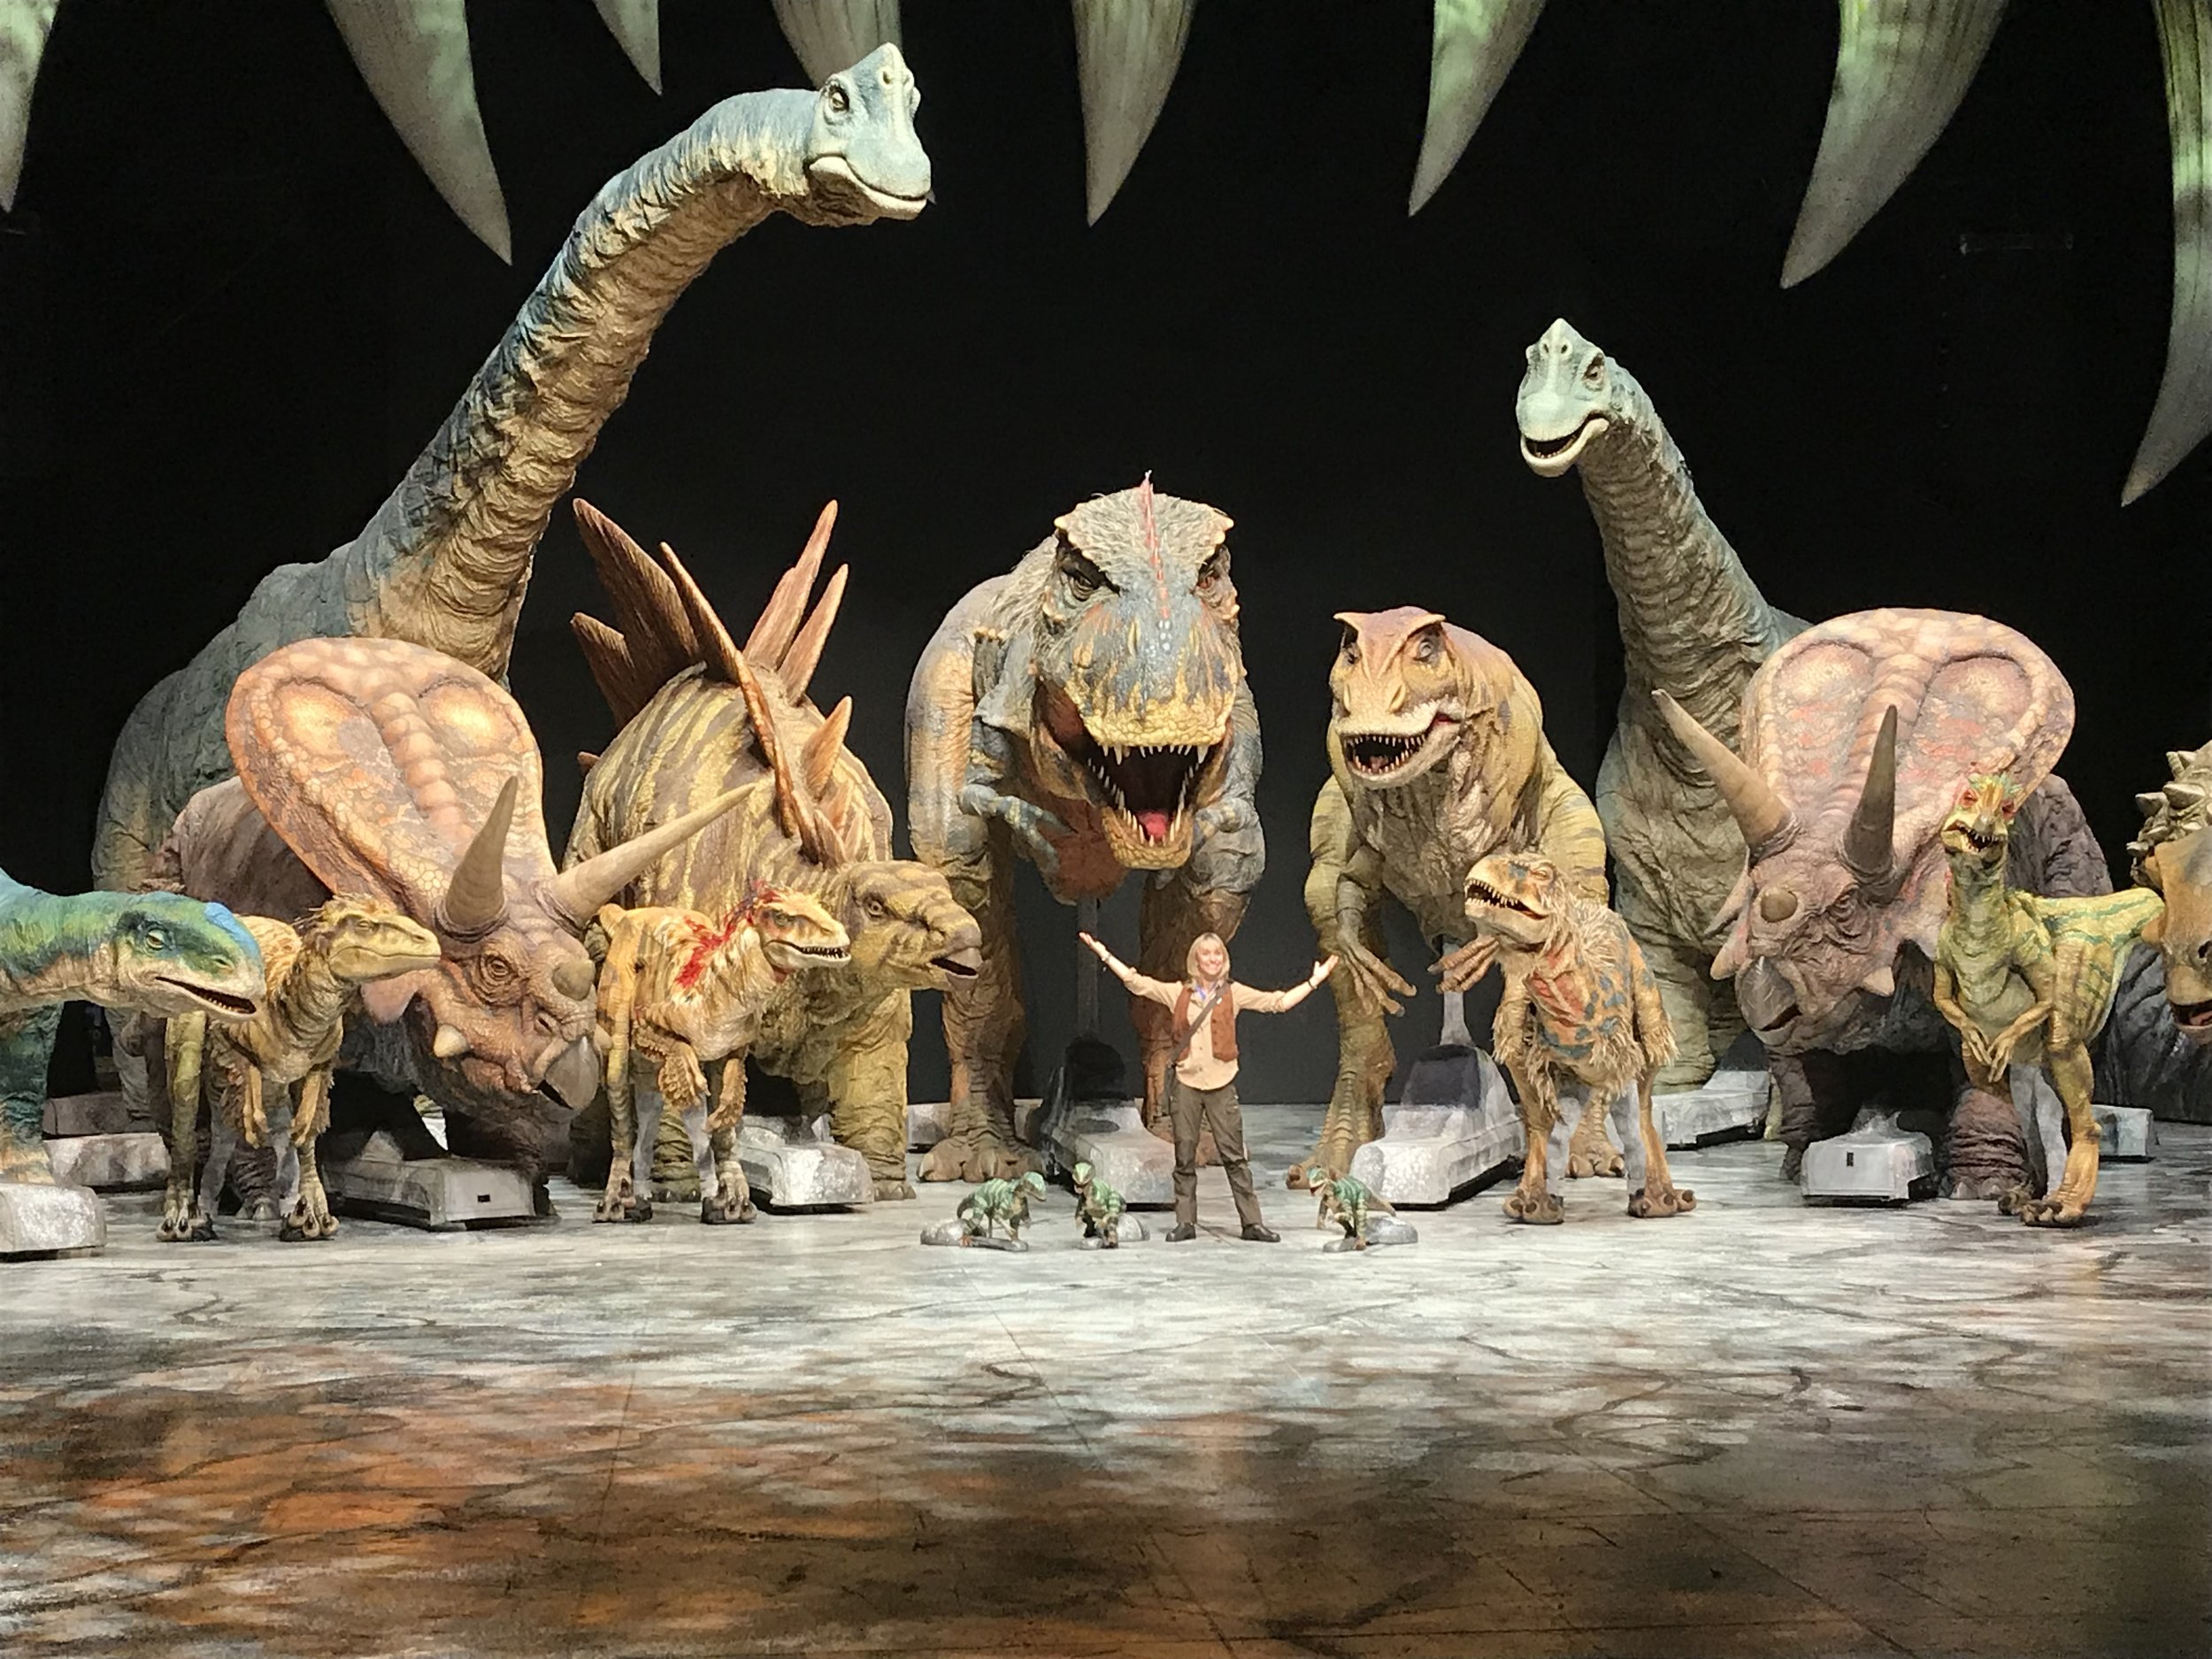 Динозавр шоу отзывы. Арена динозавров. Стадо динозавров. Walking with Dinosaurs Size. Moscow with Dinosaurs.